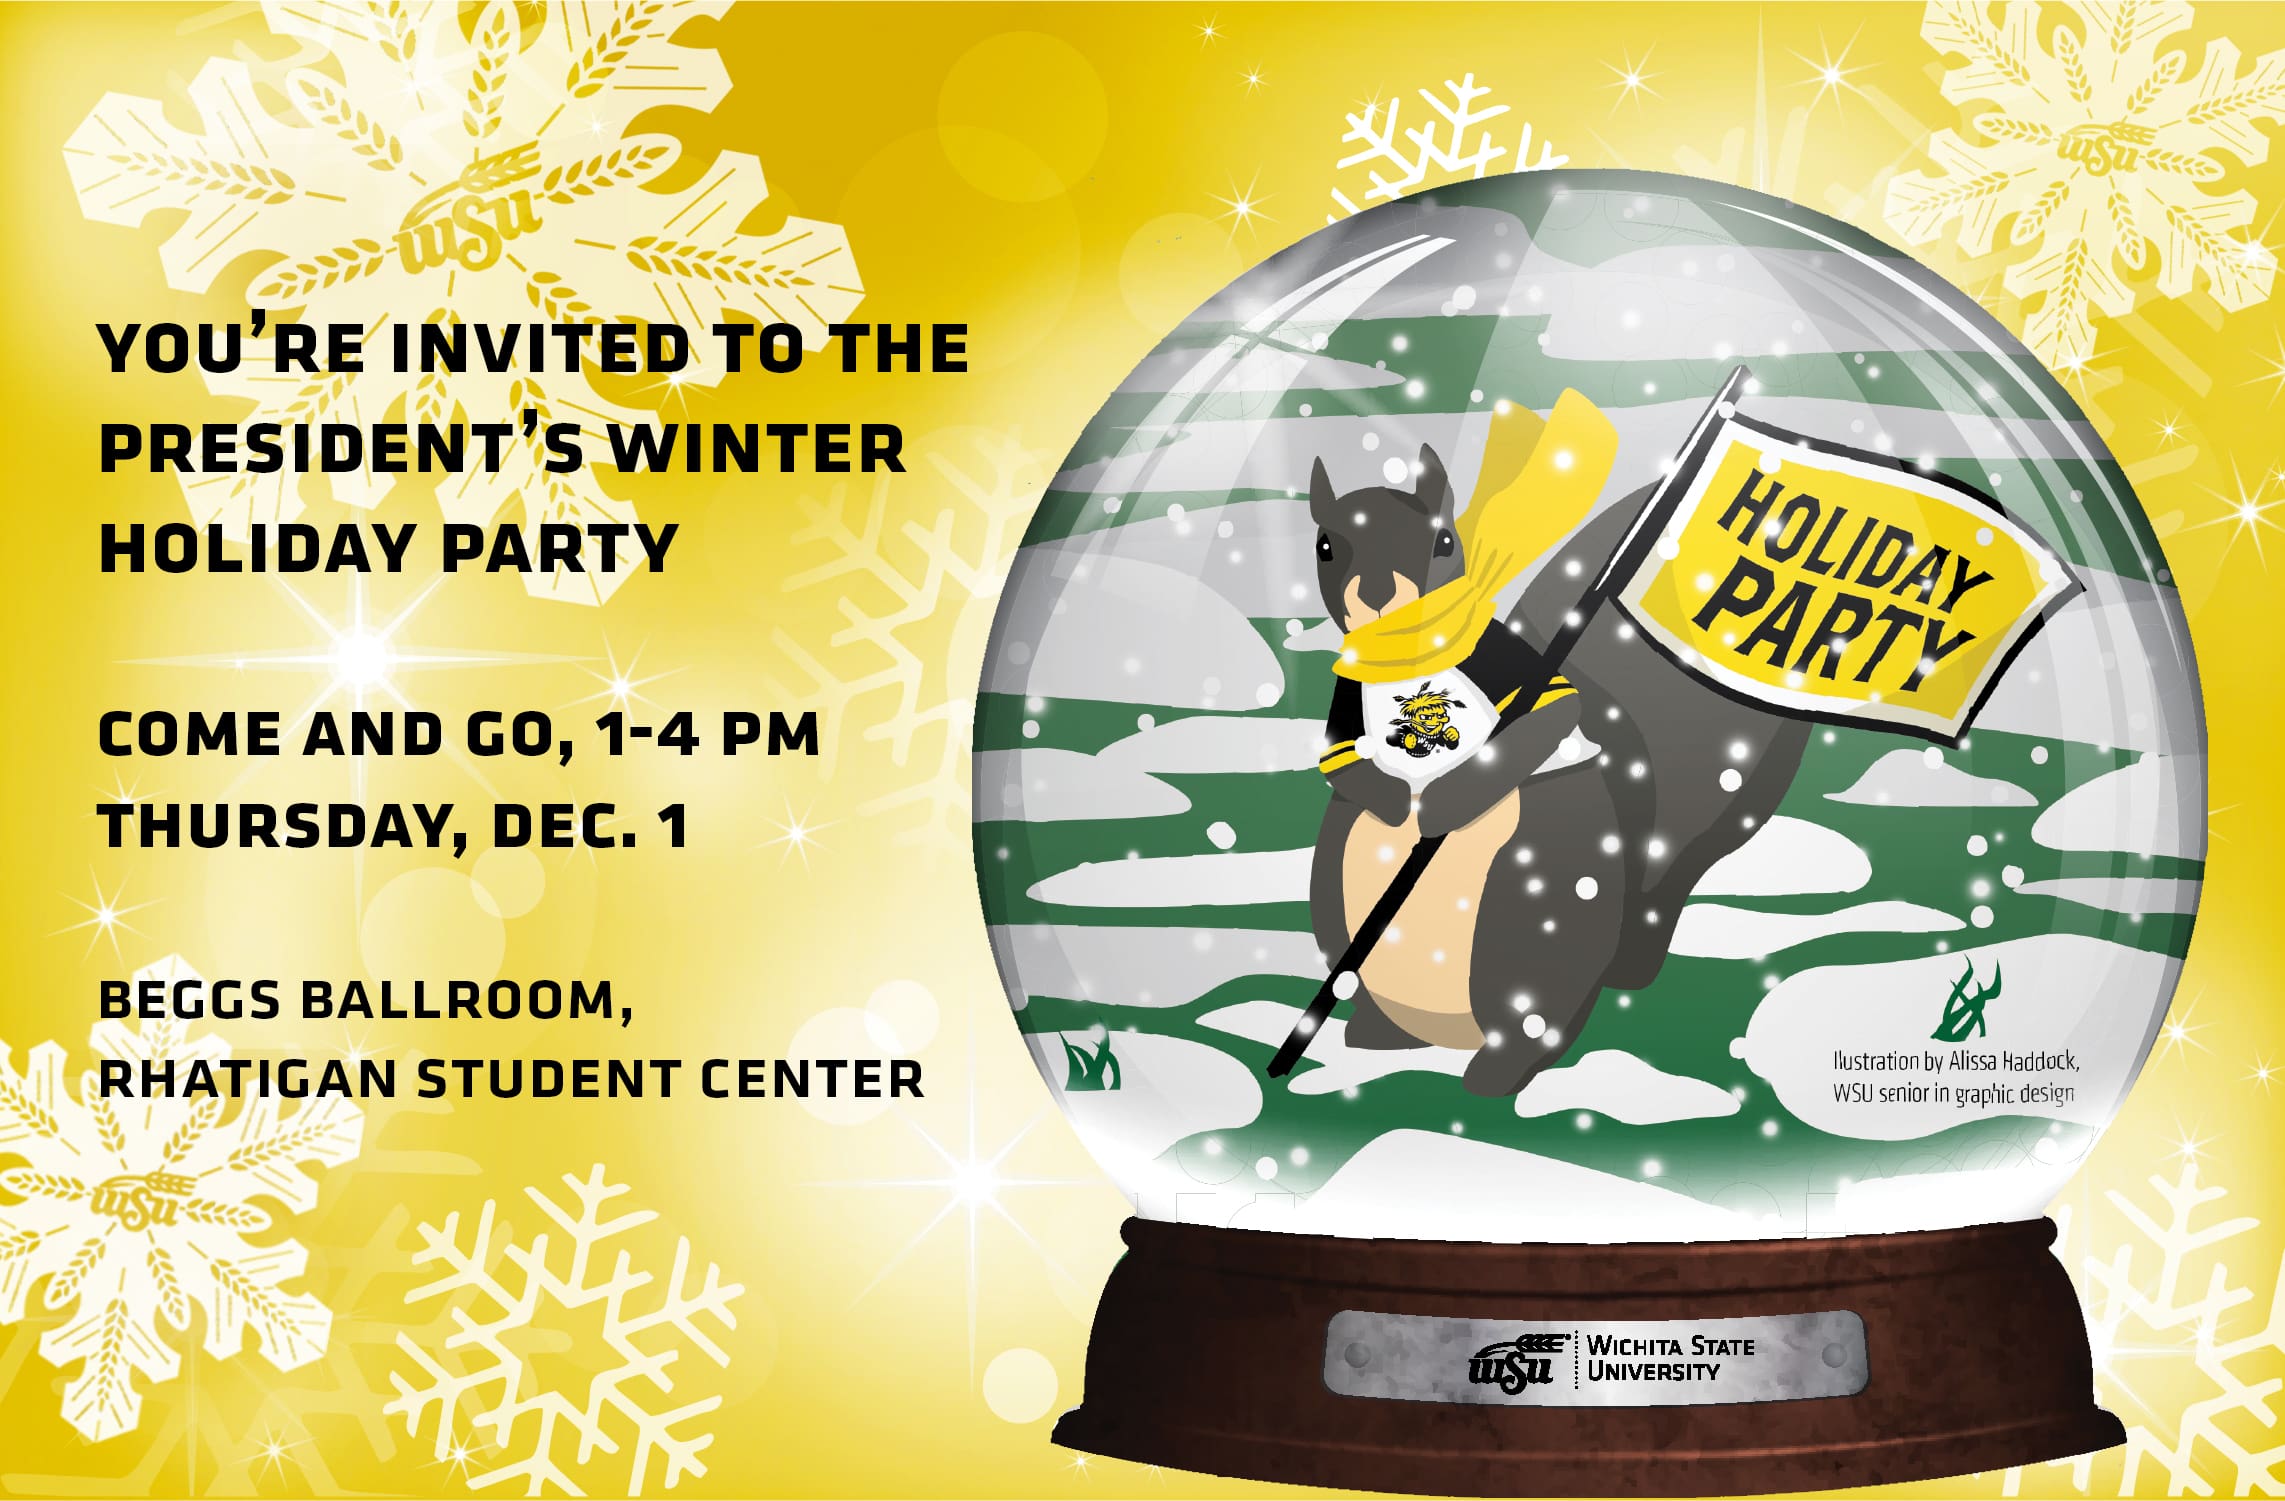 You're invited to the president's winter holiday party. Come and go, 1-4 p.m. Thursday, Dec. 1; Beggs Ballroom, Rhatigan Student Center